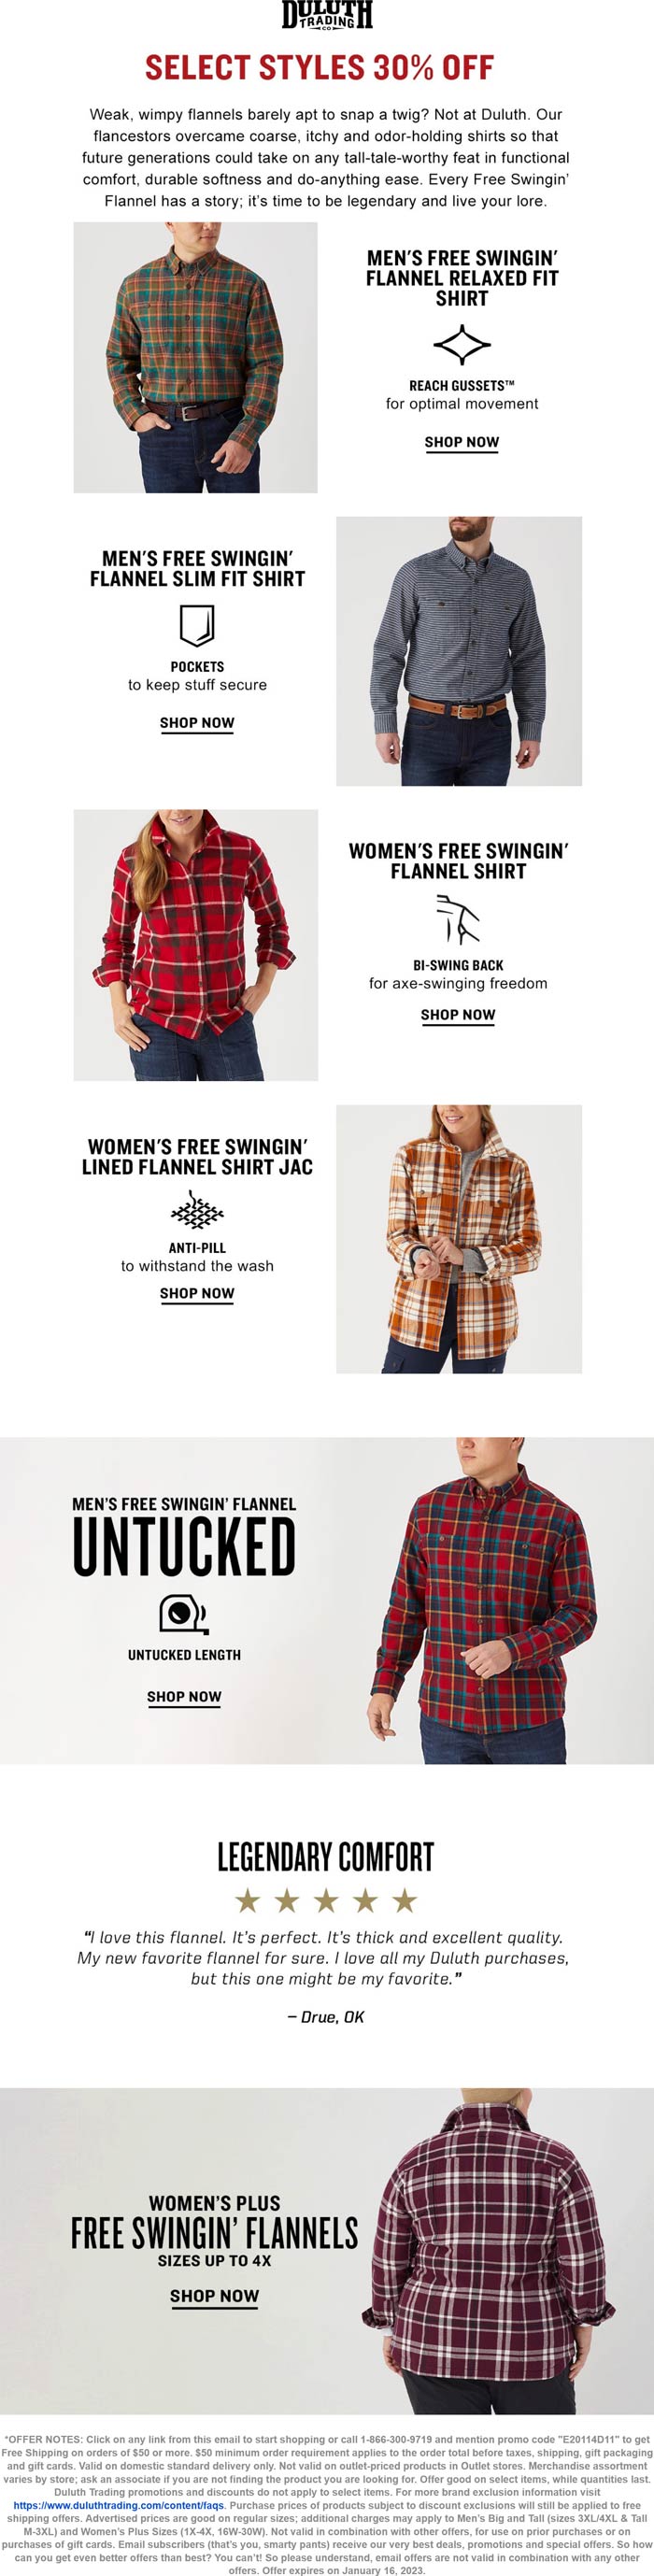 Duluth Trading Co stores Coupon  30% off flannels at Duluth Trading Co via promo code E20114D11 #duluthtradingco 